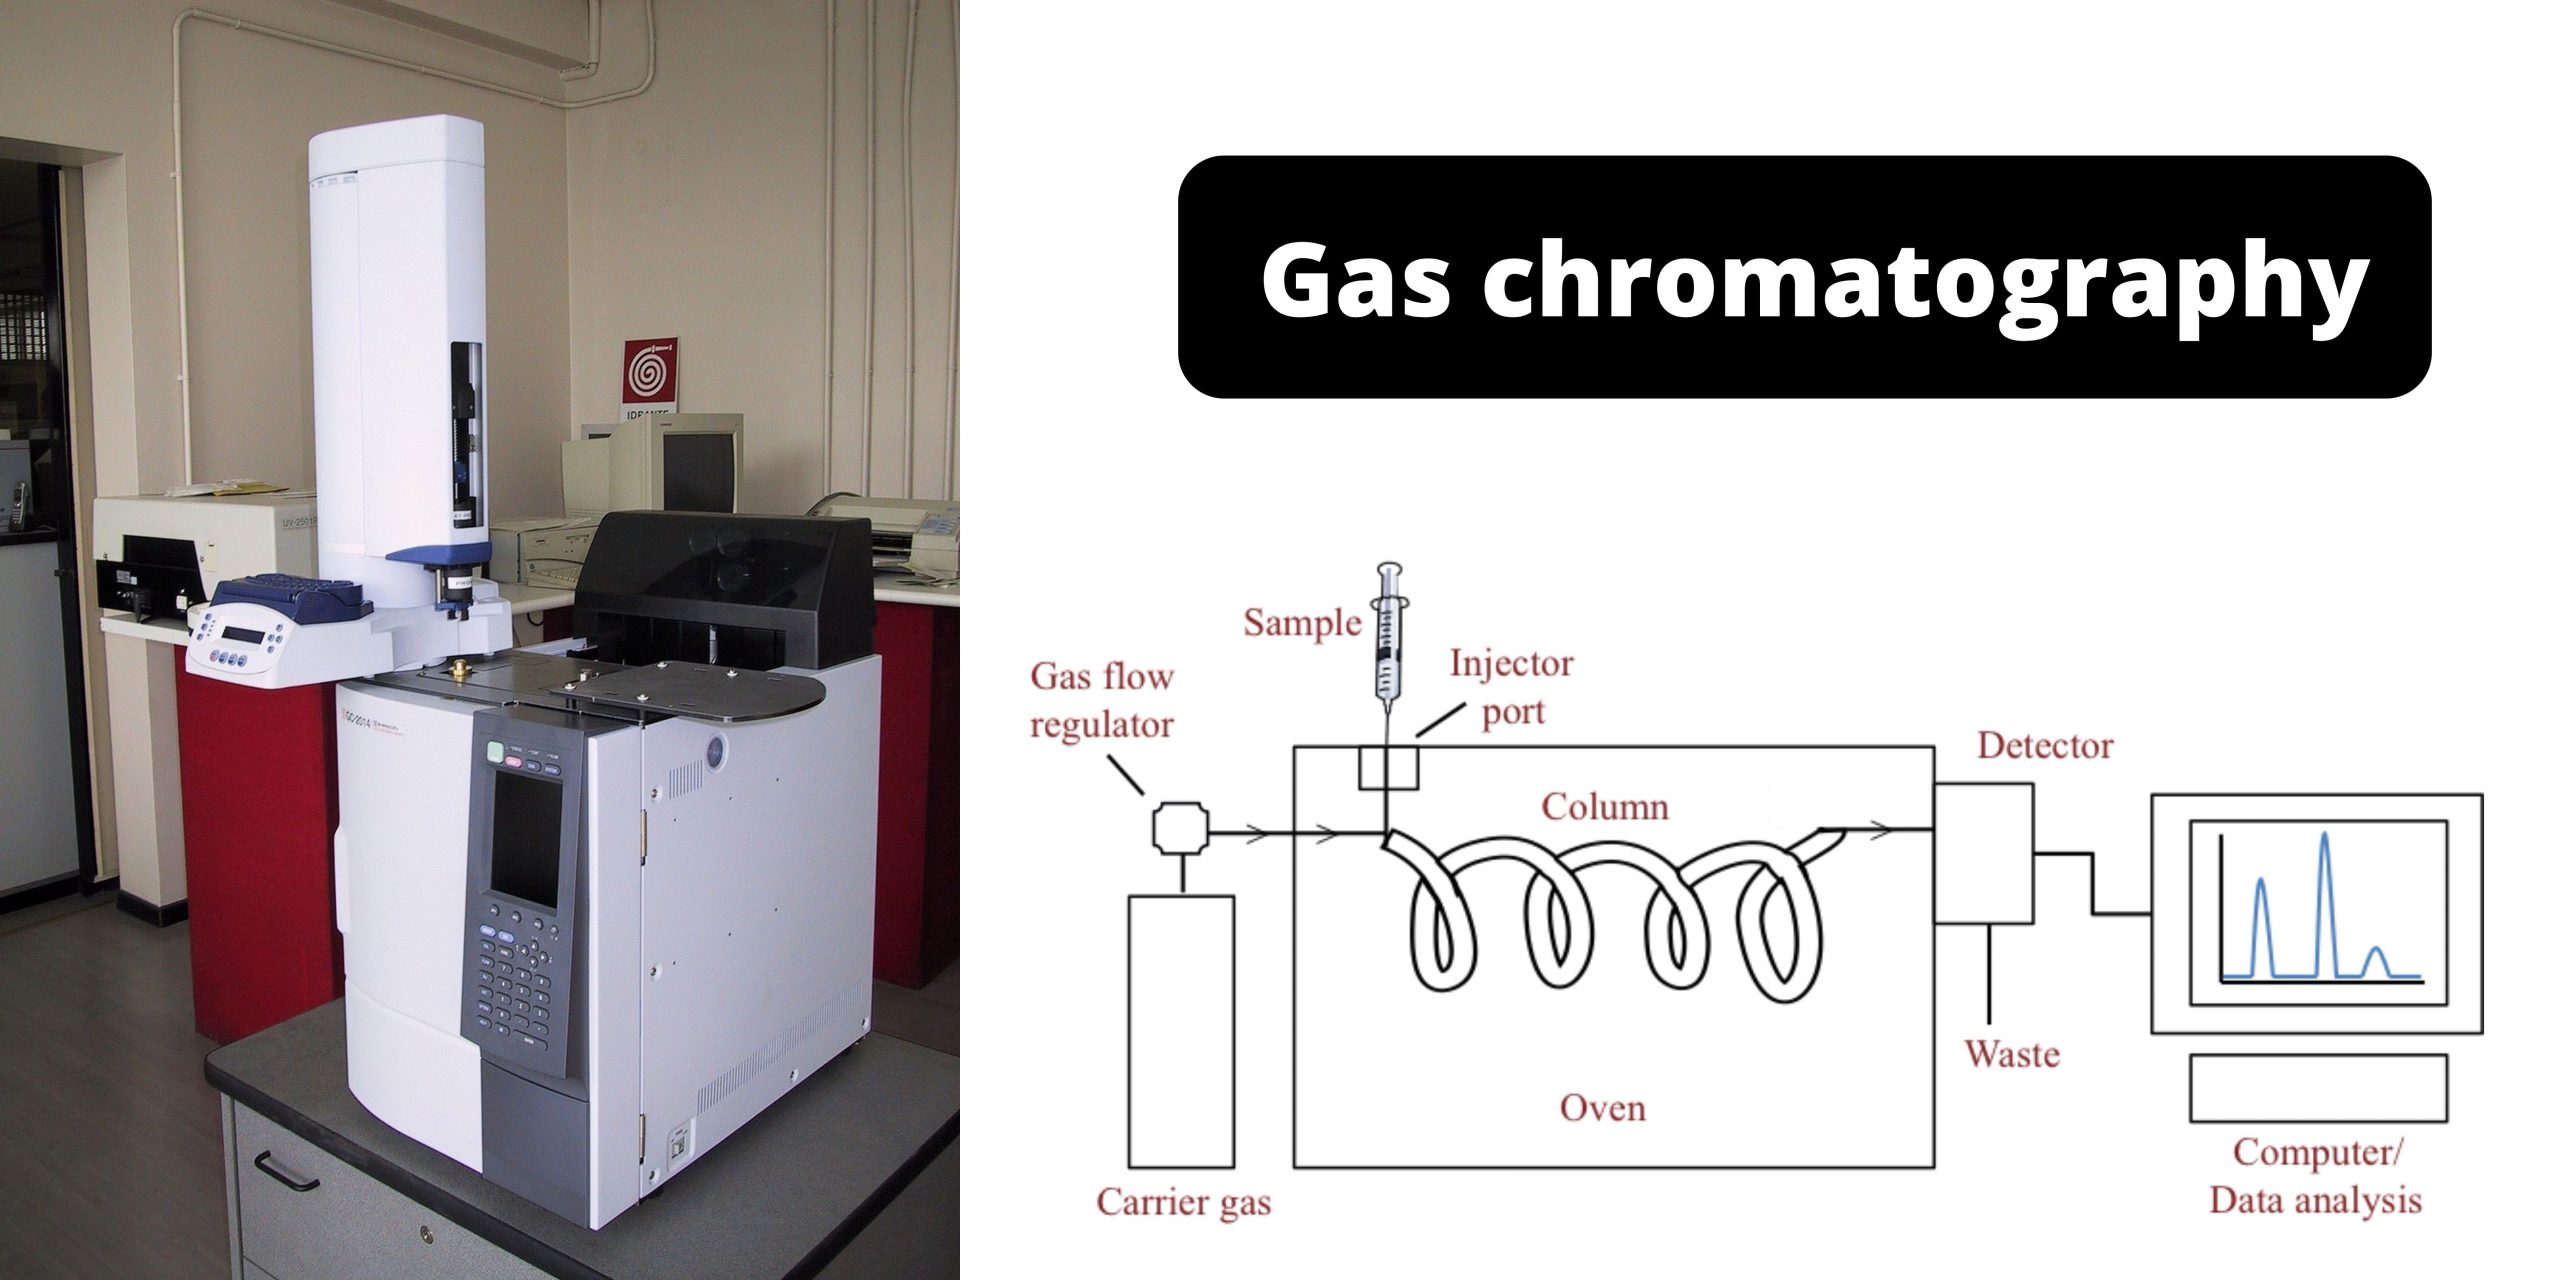 Gas chromatography Definition, principle, working, uses